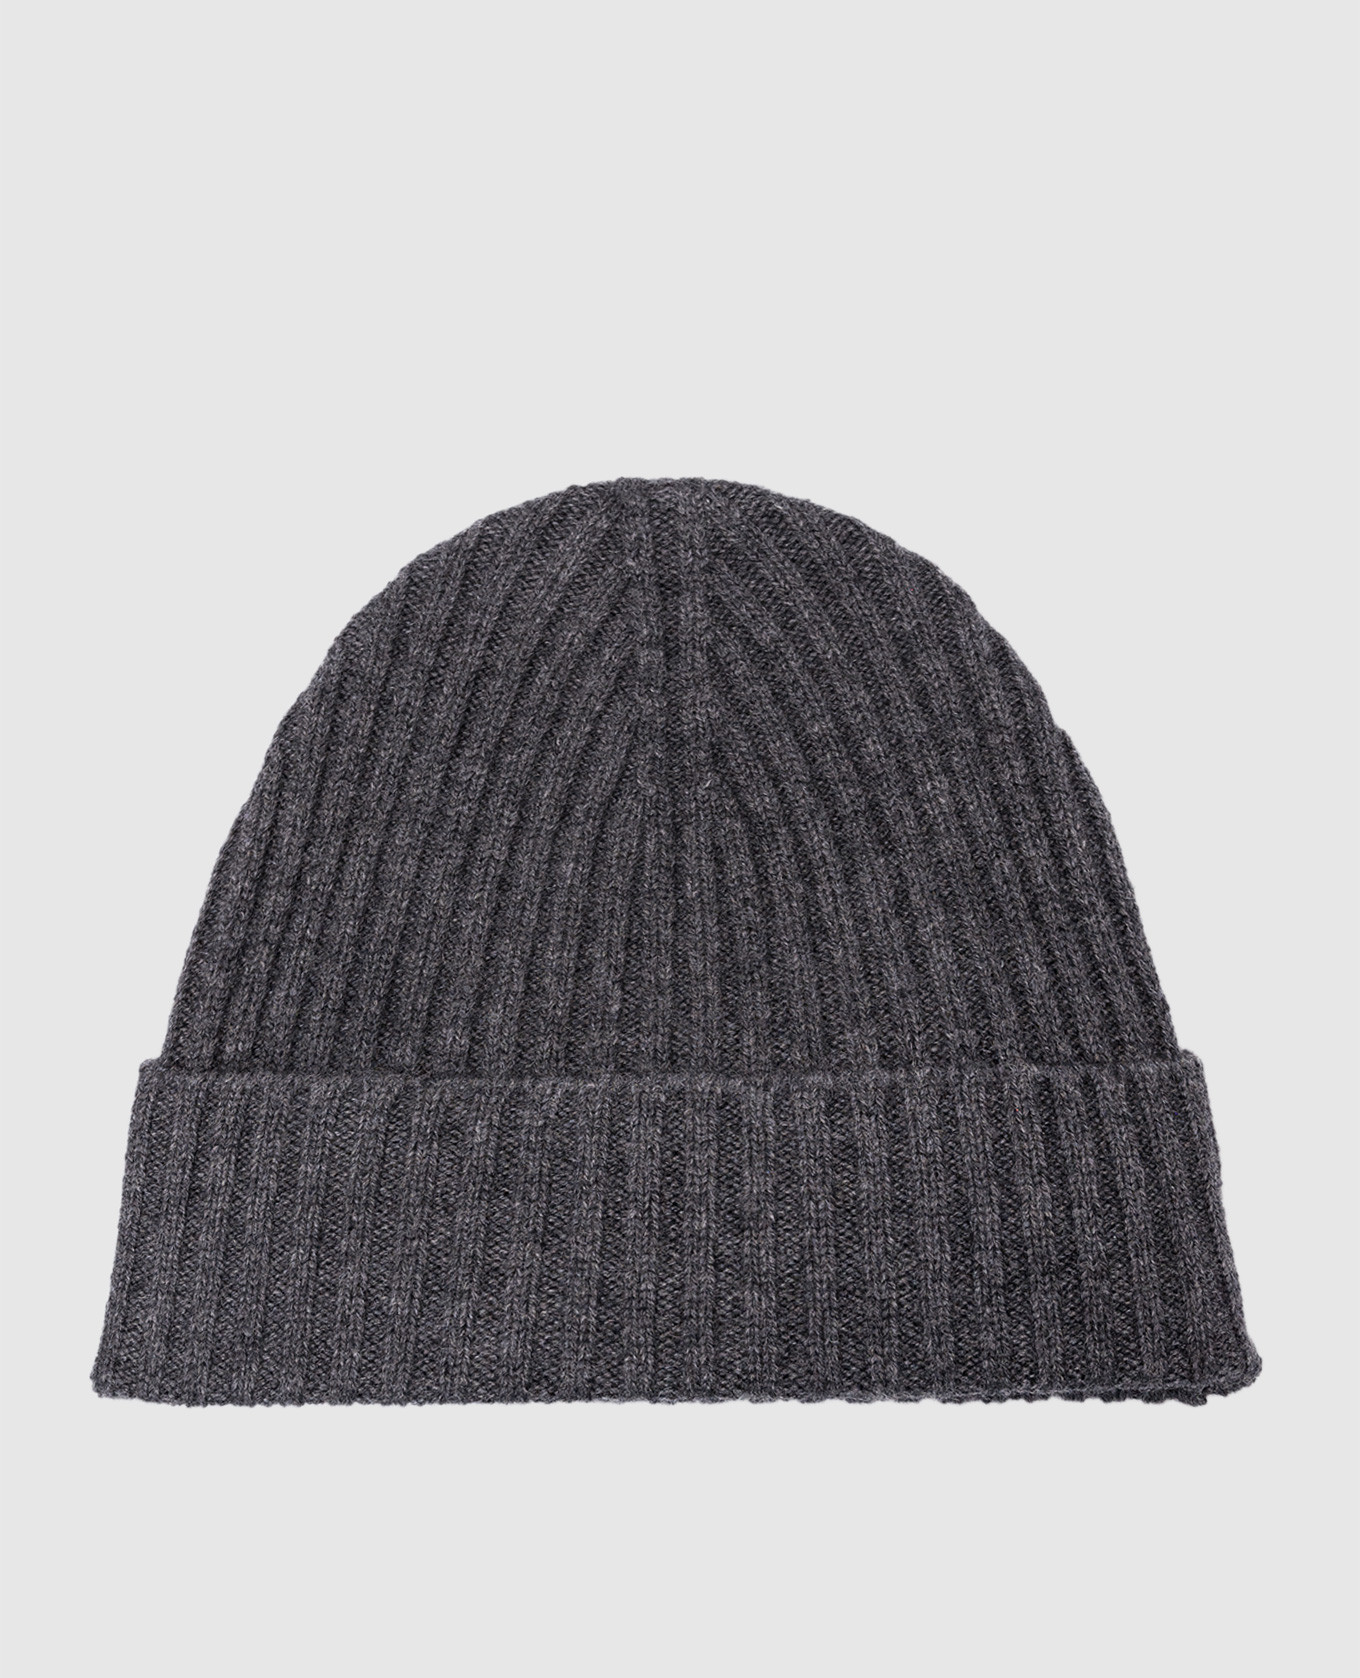 Gray cap made of wool and cashmere